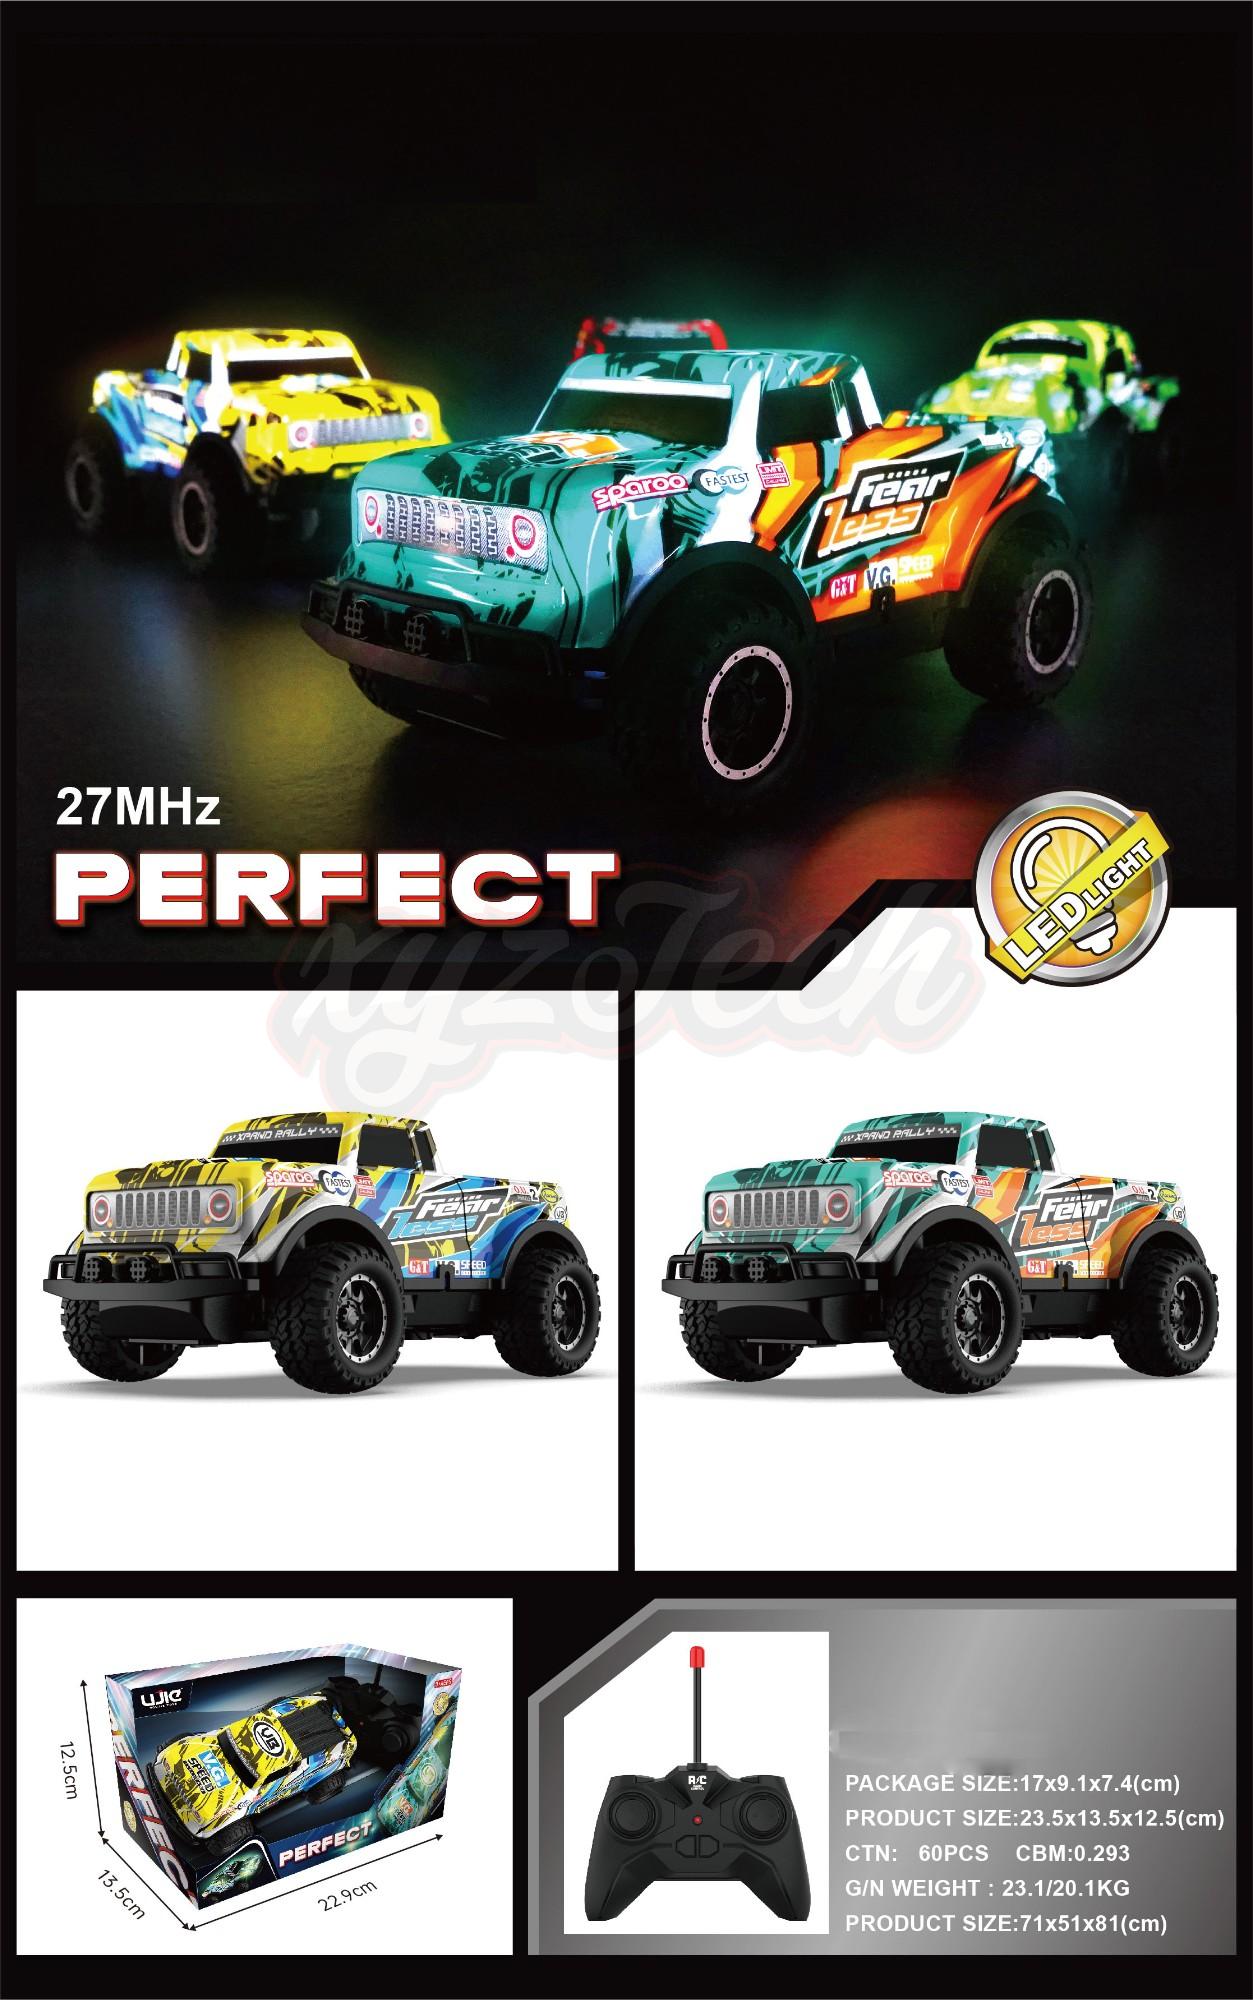 1:24 off-road remote control vehicle